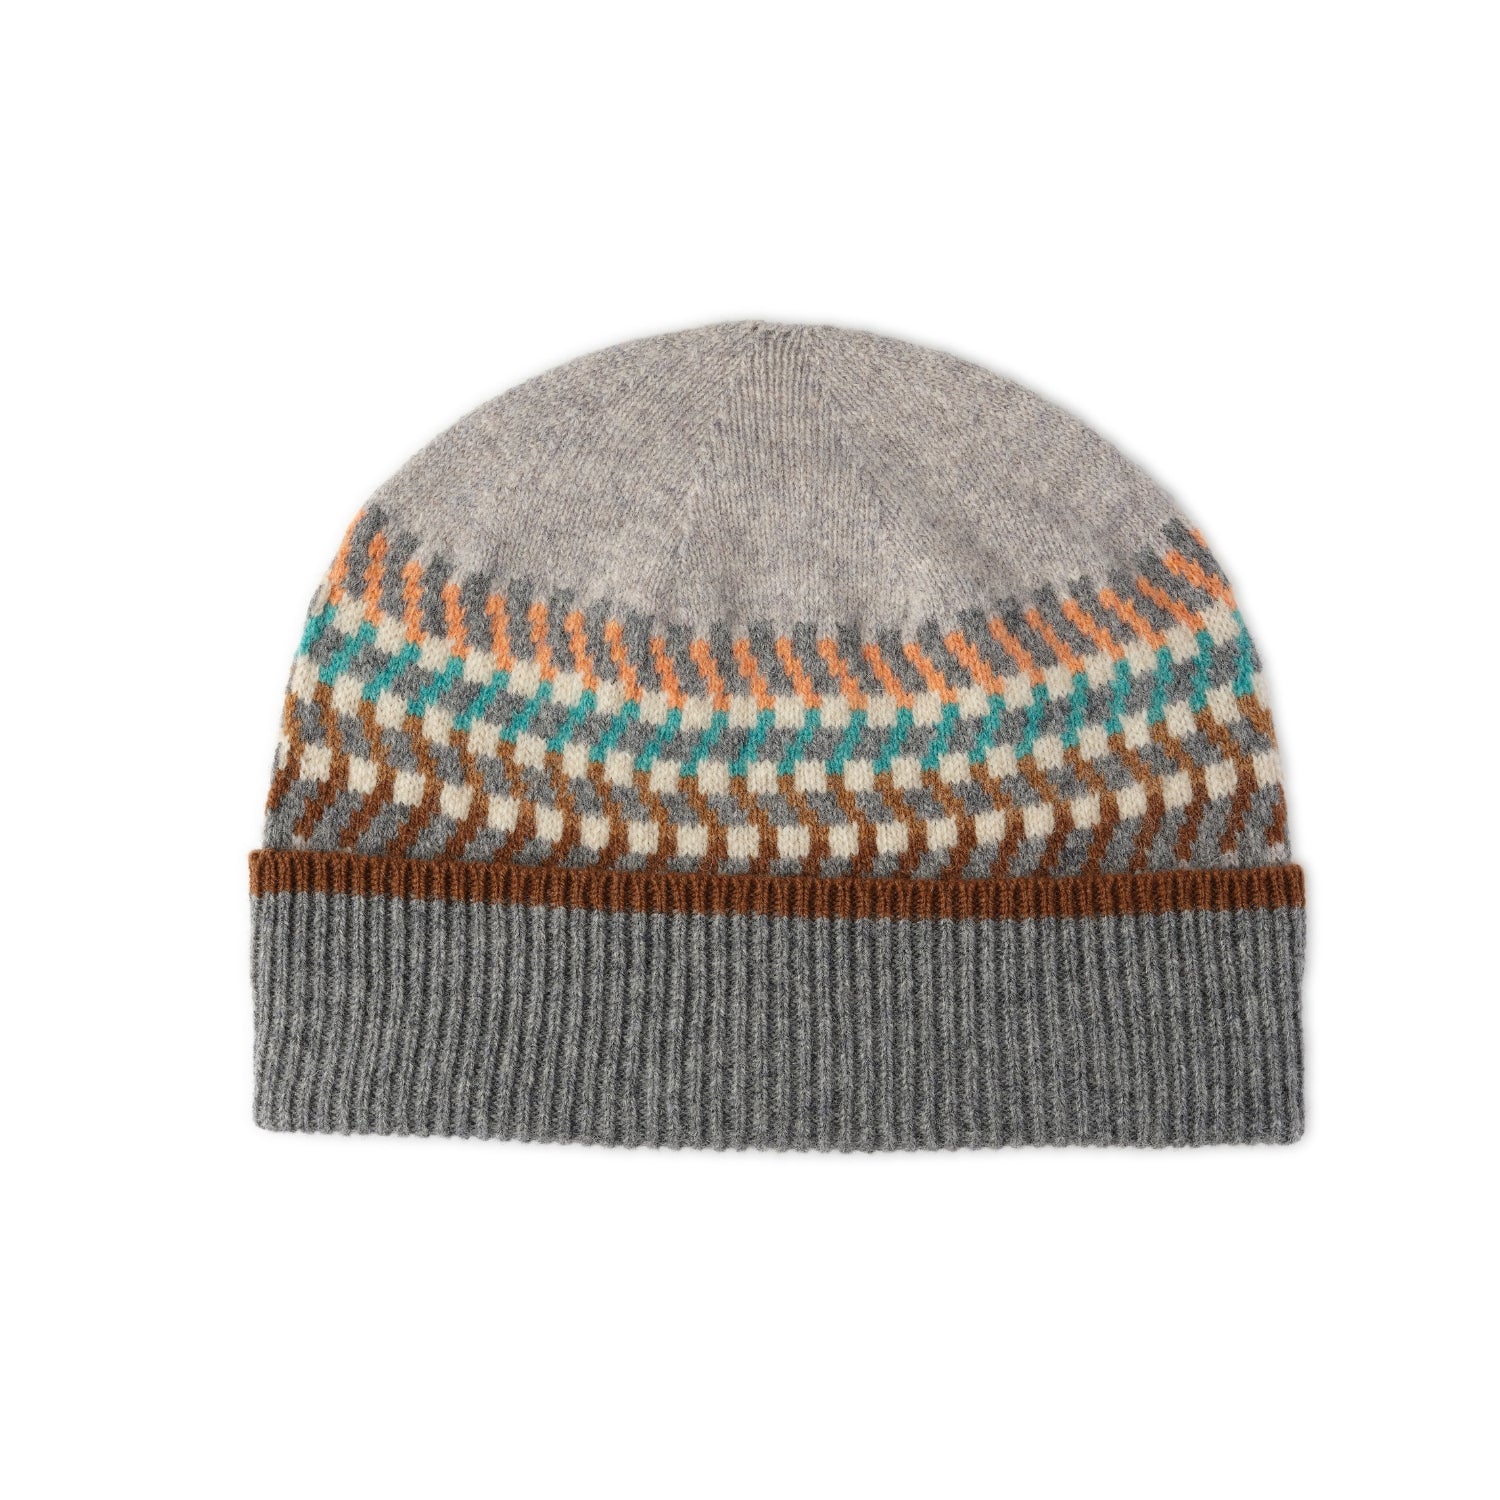 Ladies Patterned Beanie Hat | Grey | Jacquard Print | The Cashmere Choice